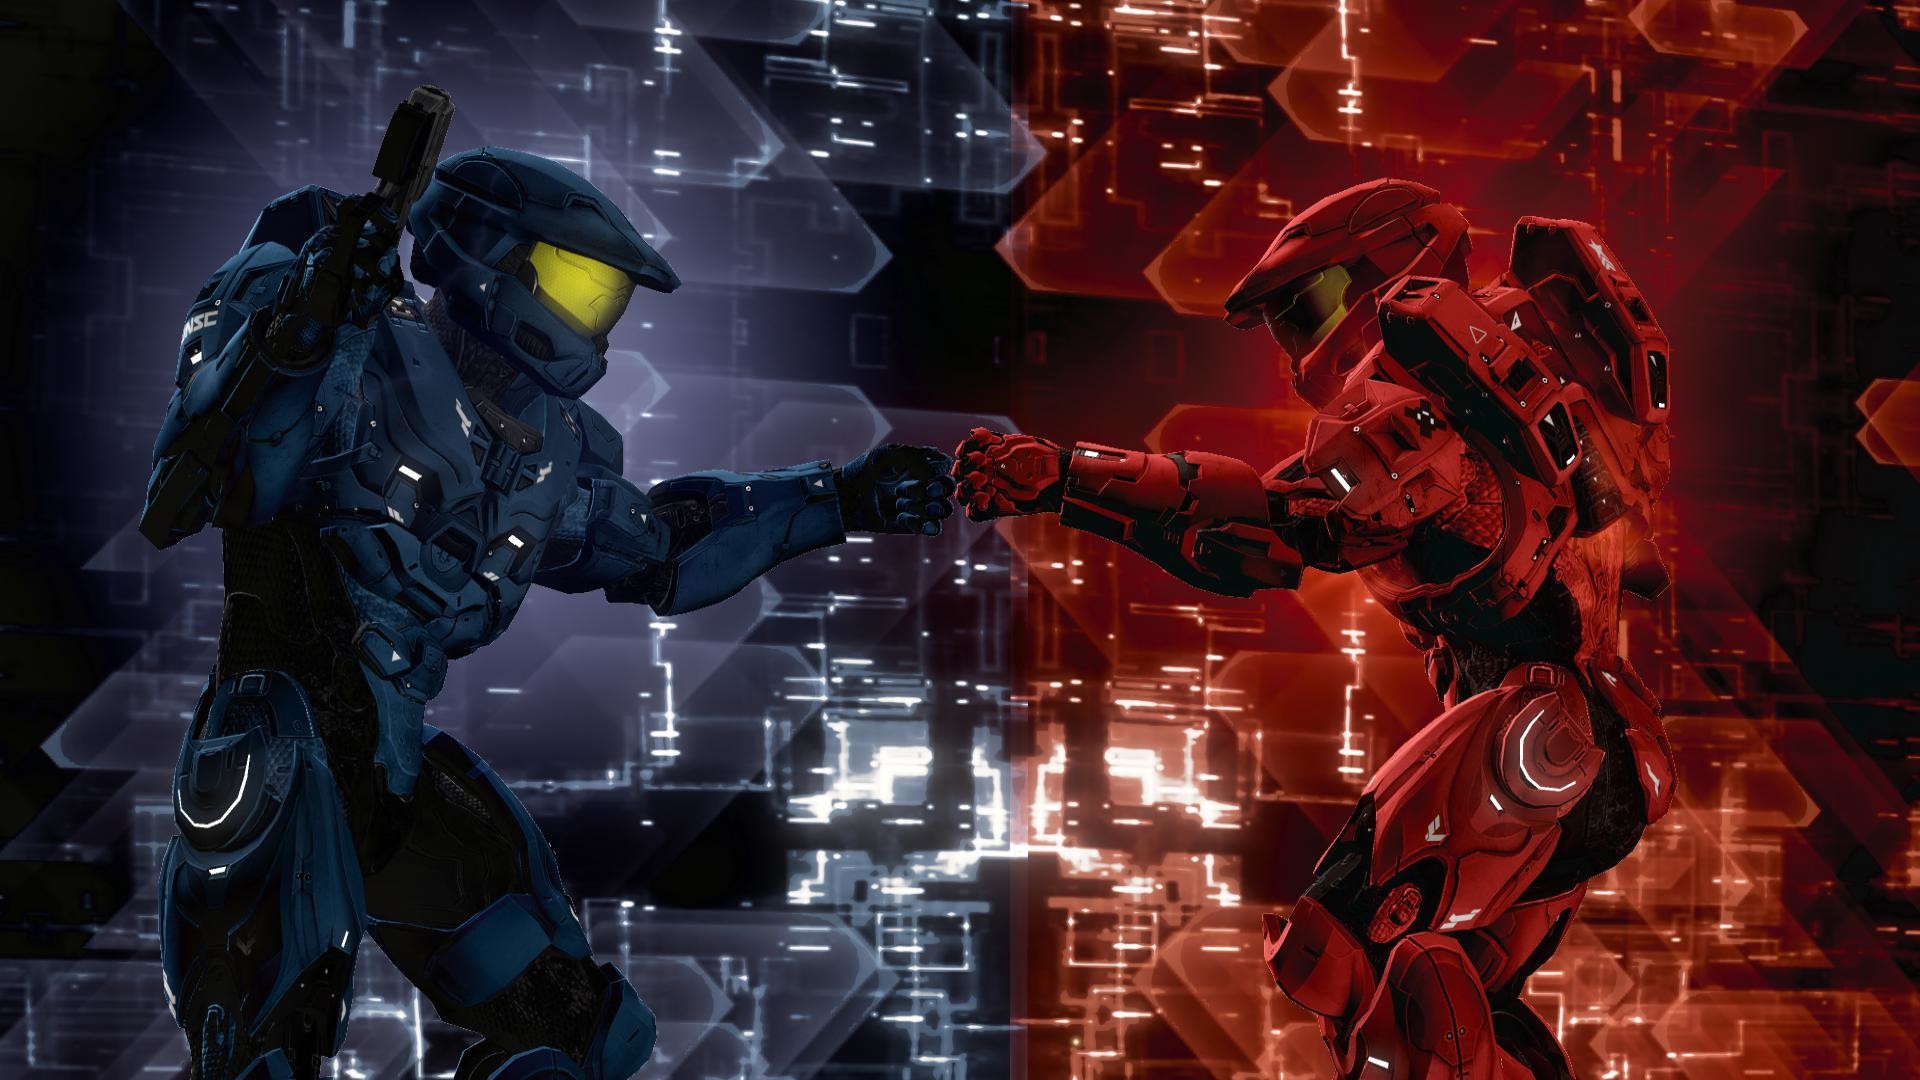 1920x1080 New Red vs Blue poster adapted for use as an iPhone wallpaper. - Imgur |  Download Wallpaper | Pinterest | Red vs blue and Wallpaper